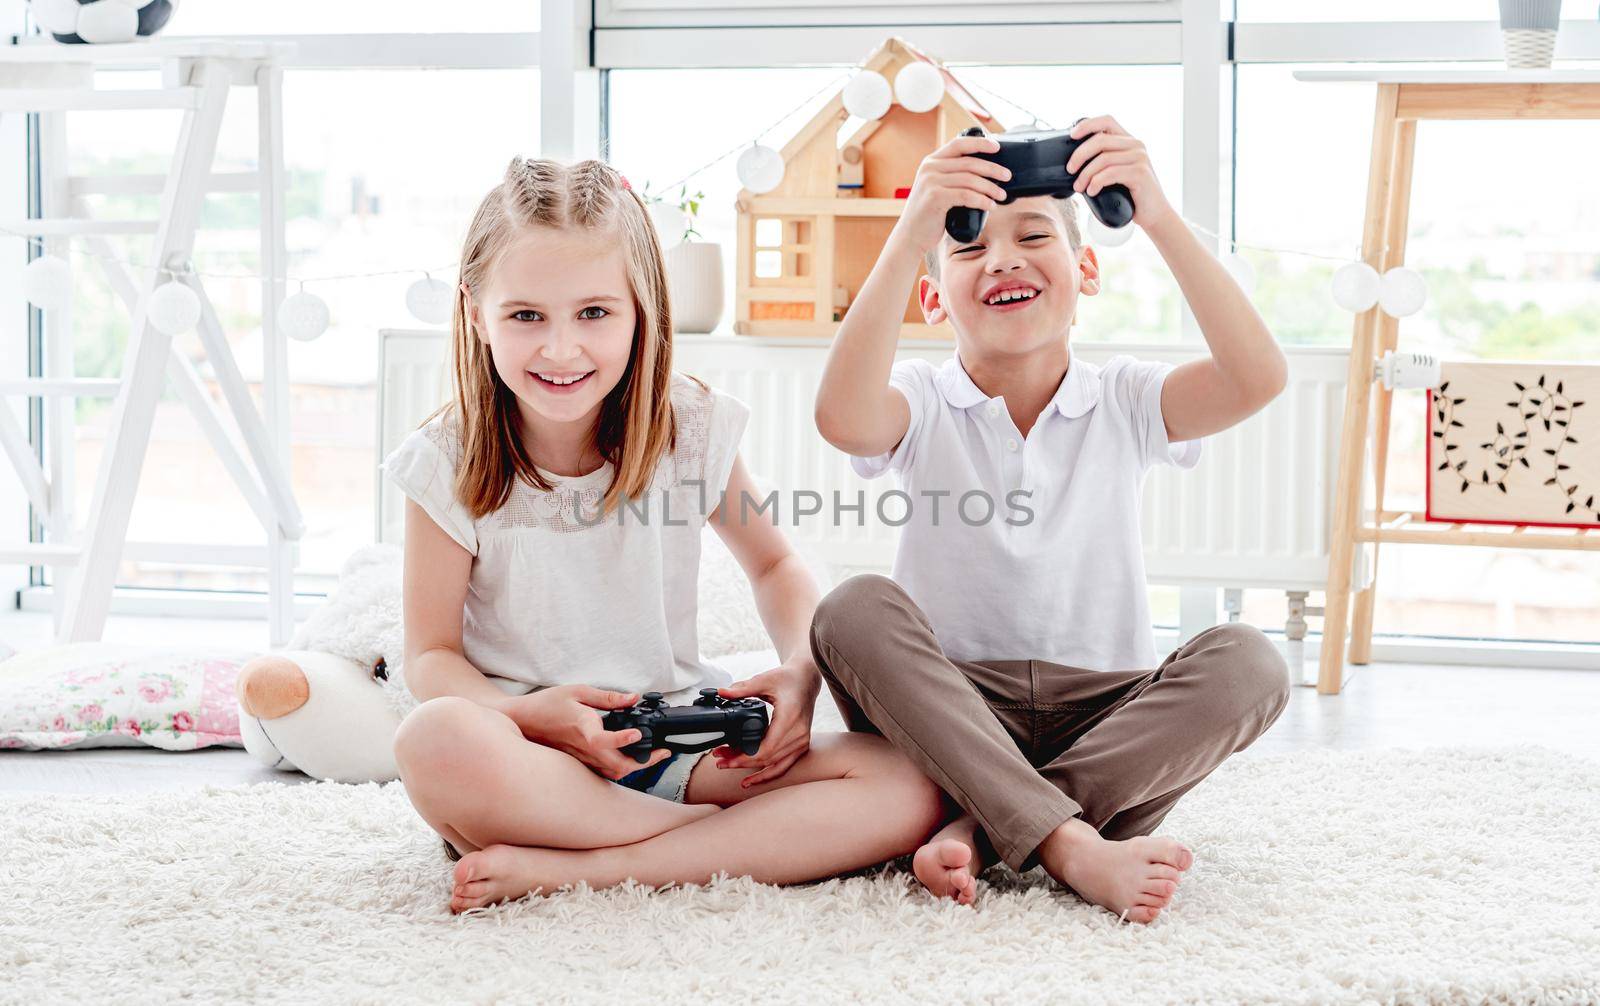 Playful kids with joysticks for video gaming sitting on floor in light room